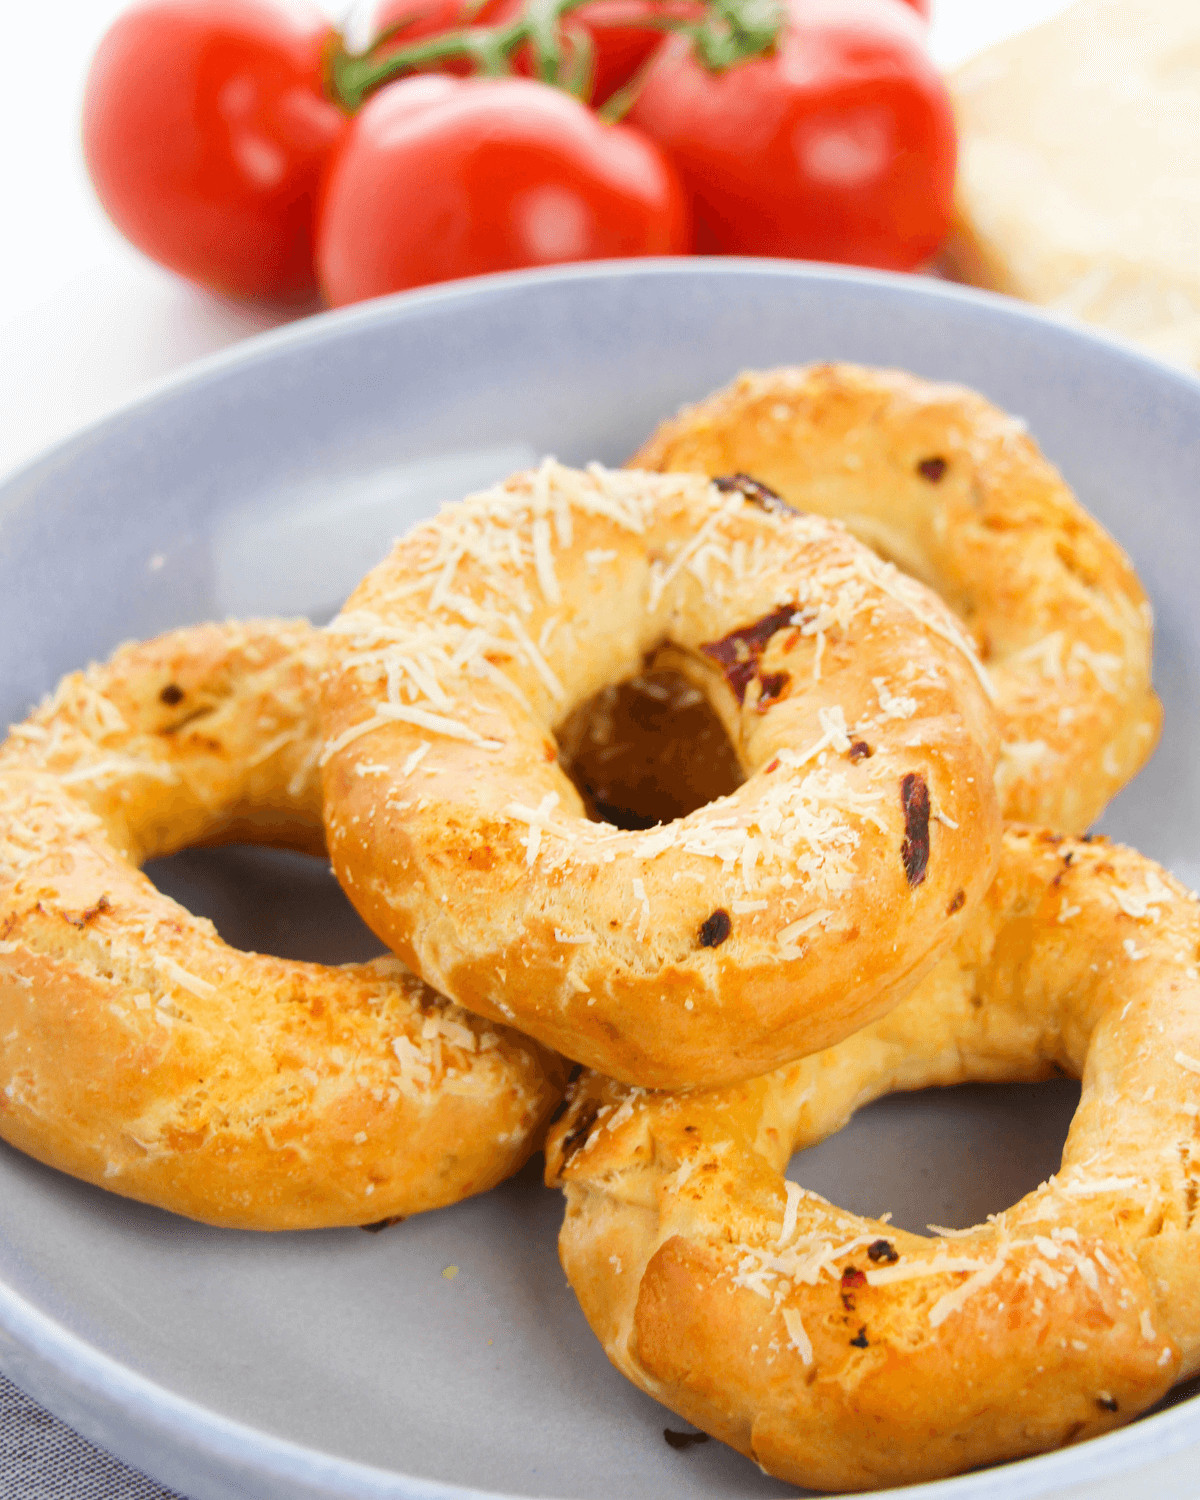 A platter of finished asiago cheese bagels with sundried tomatoes.